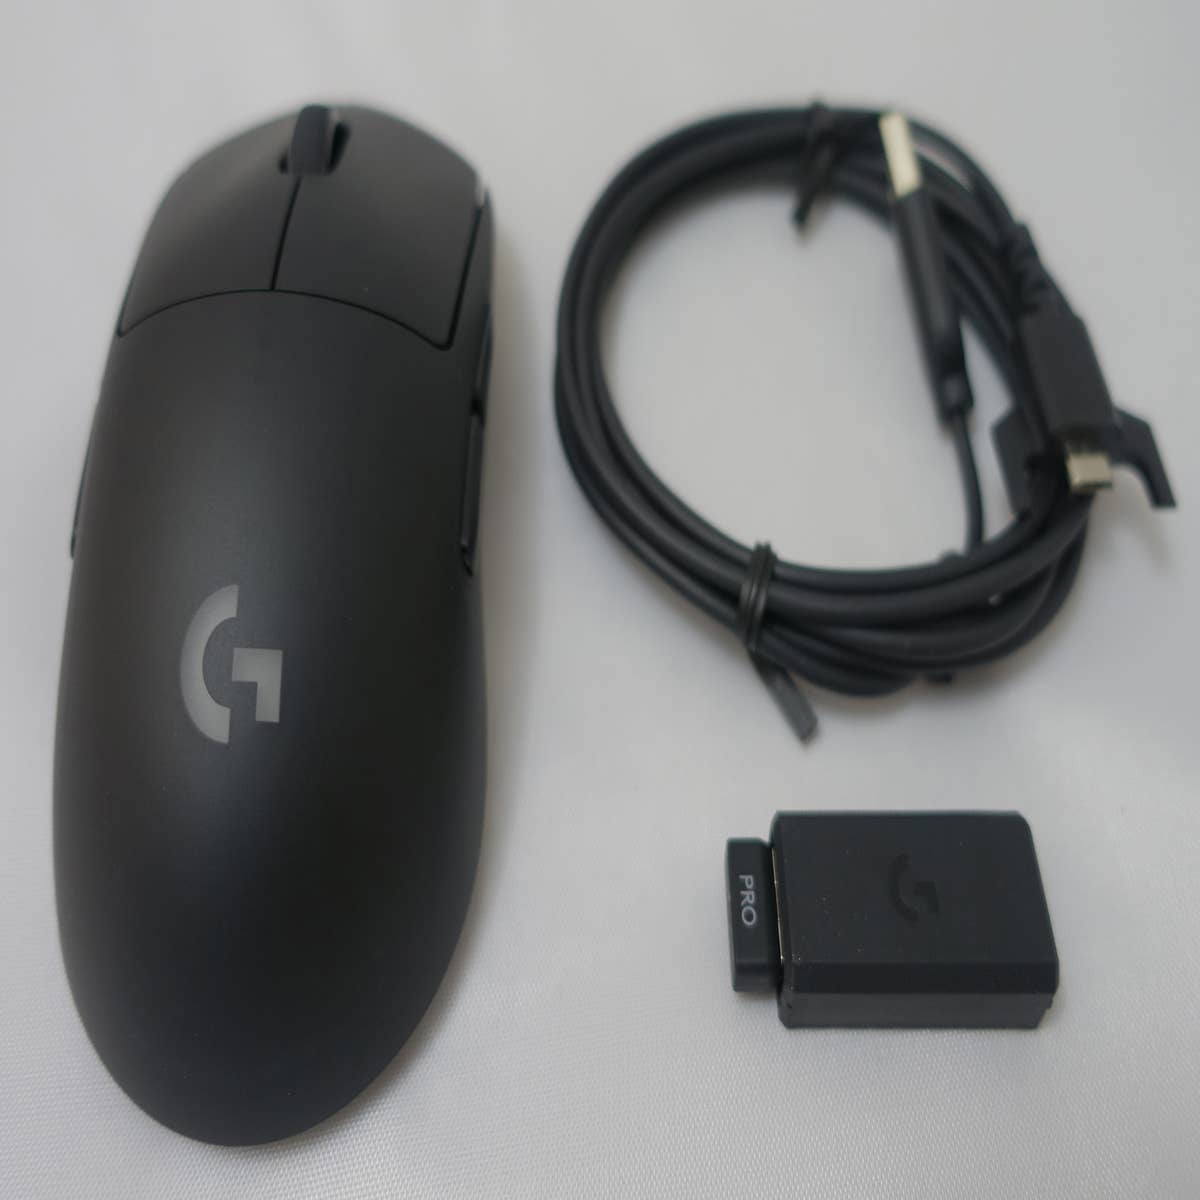 Logitech G Wireless Mouse Review | VG247